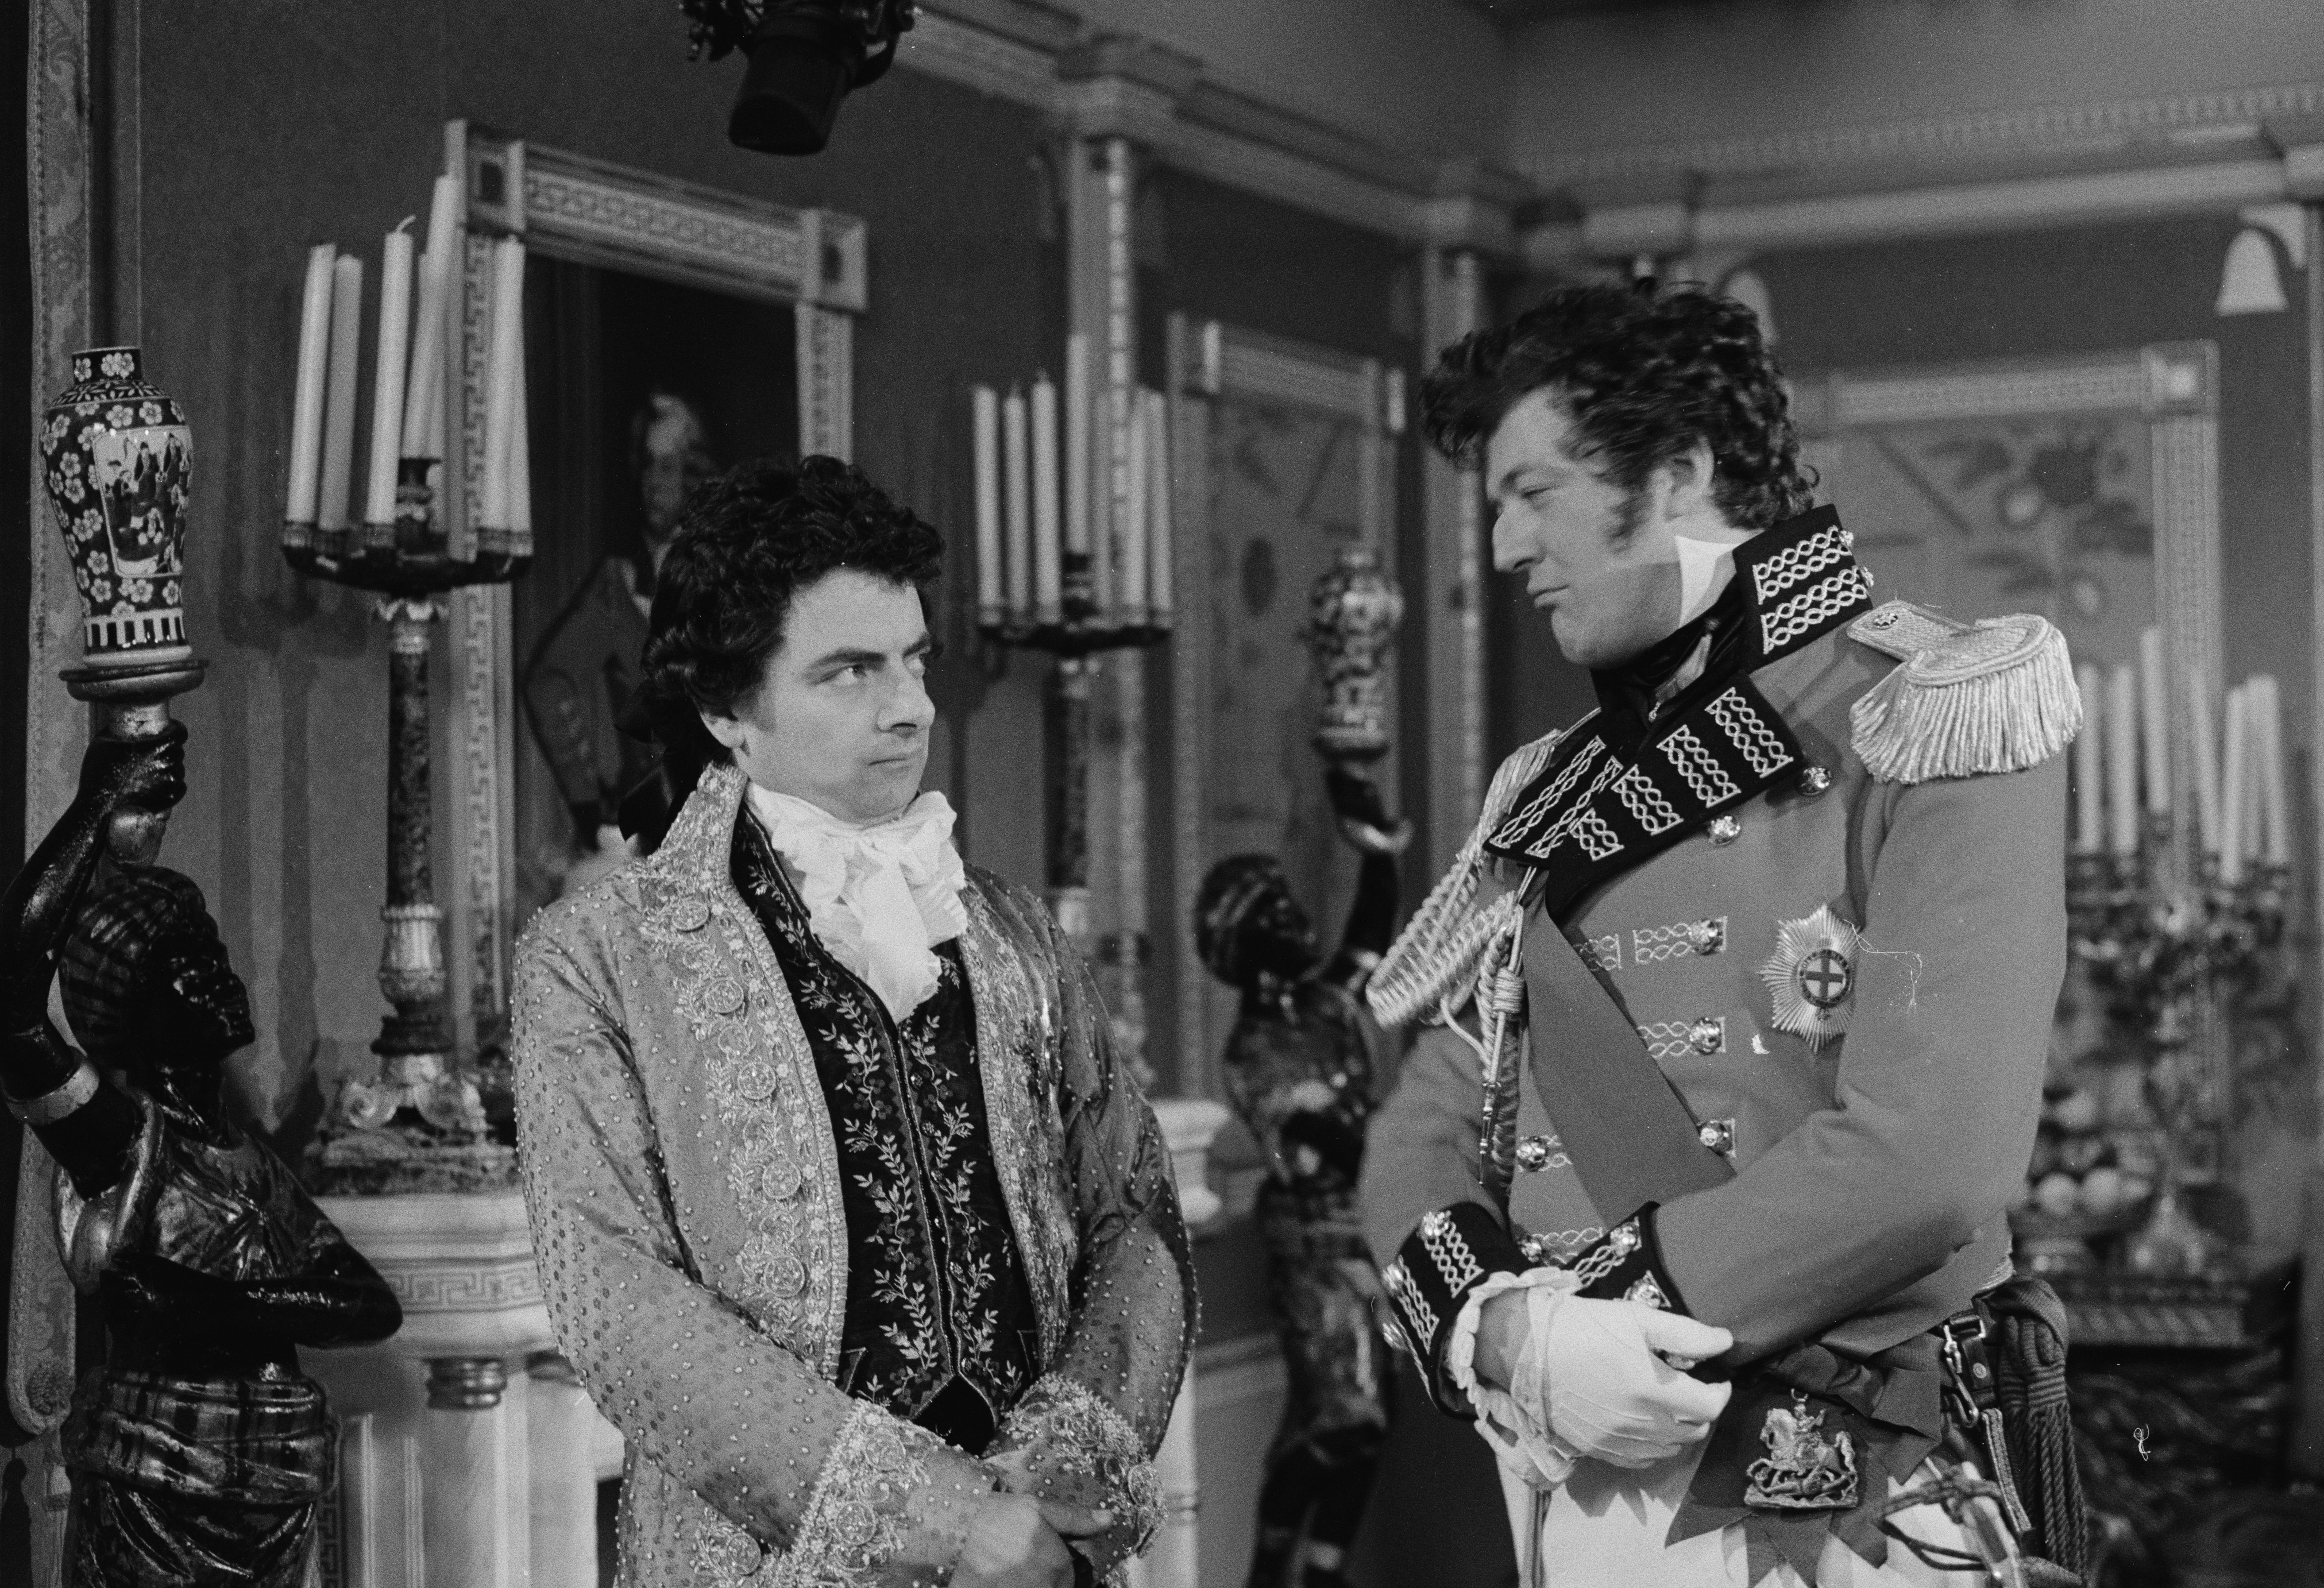 Actors Rowan Atkinson (left) and Stephen Fry in a scene from episode 'Duel and Duality' of the BBC television series 'Blackadder the Third', July 3, 1987. | Source: Getty Images